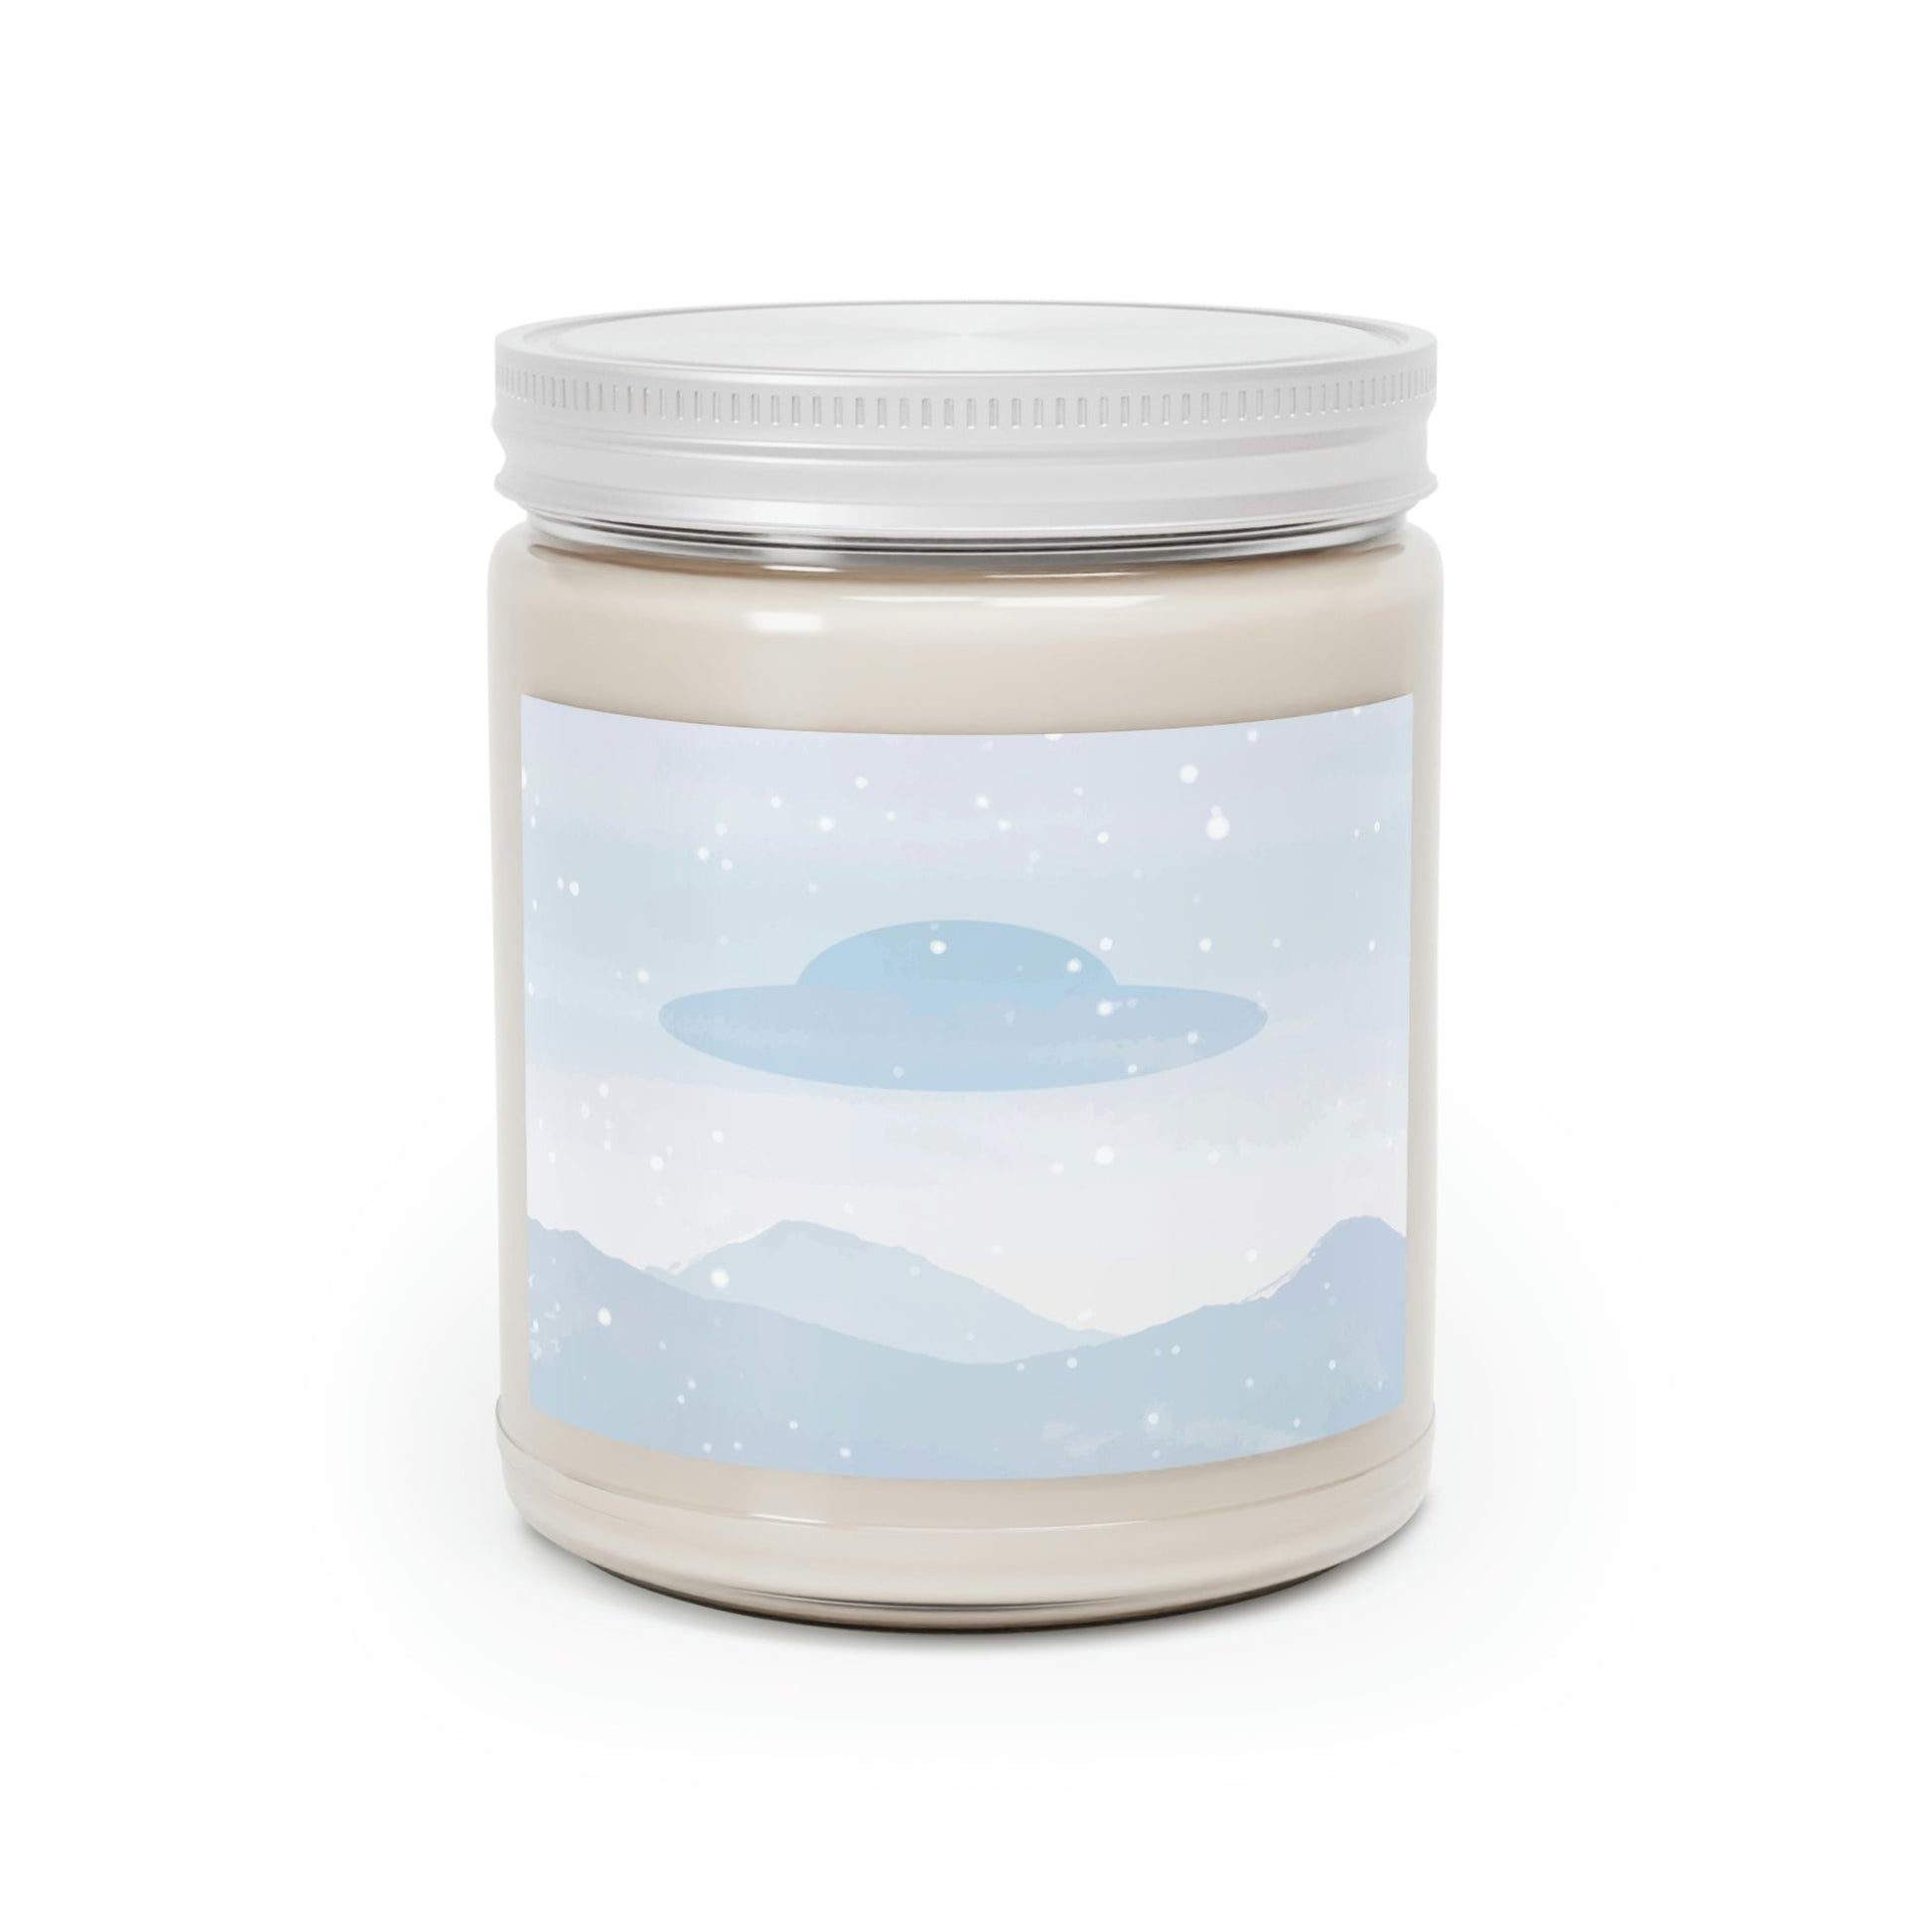 UFO Watercolor Winter Nature Aliens Arrival Minimalist Art Scented Candle Up to 60hSoy Wax 9oz Ichaku [Perfect Gifts Selection]